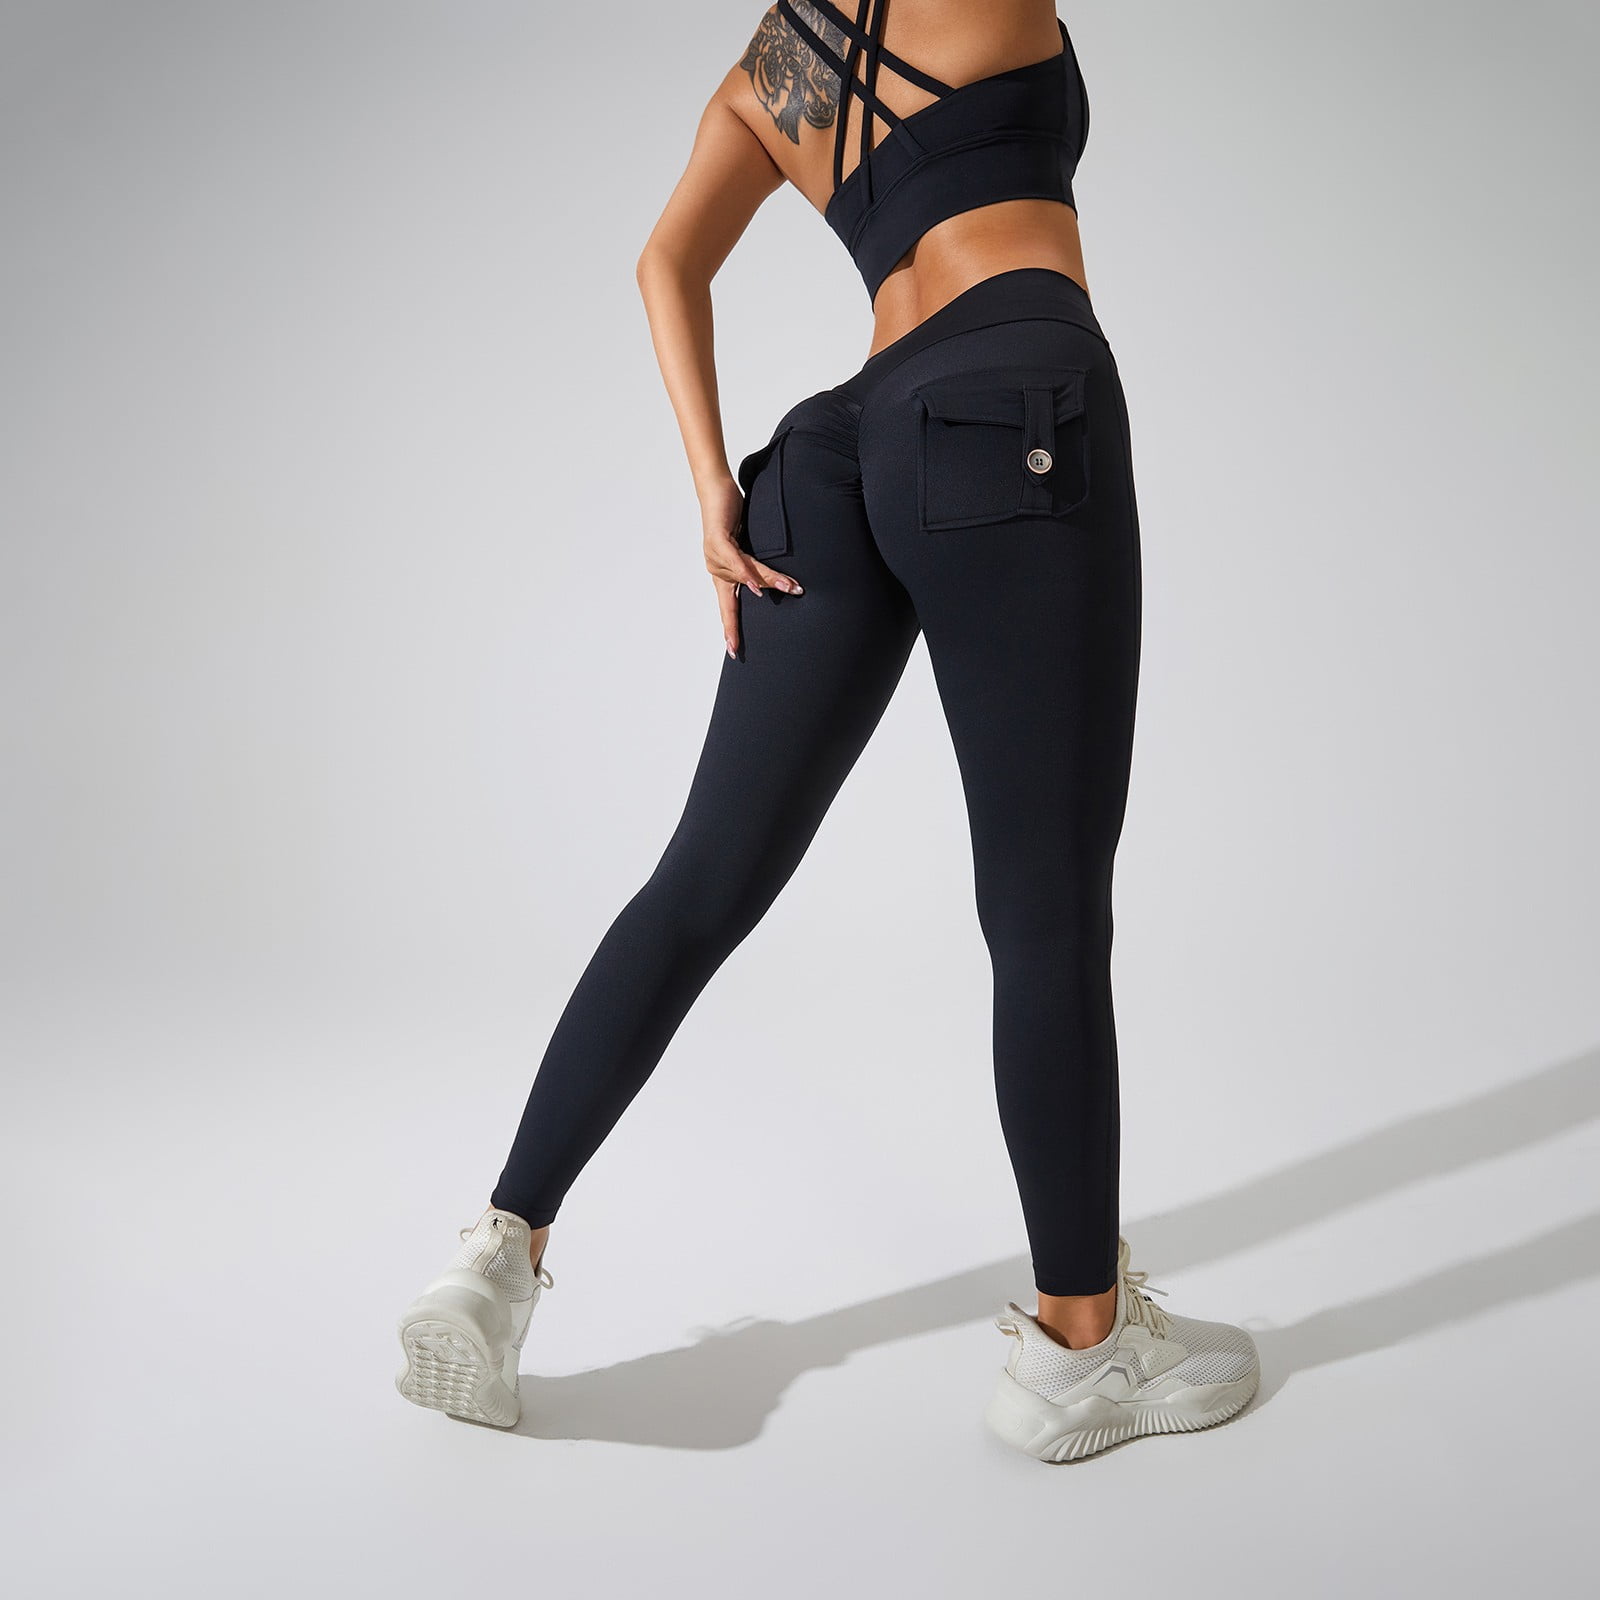 Ankle-length WR.UP® Sport shaping leggings with a classic WR.UP